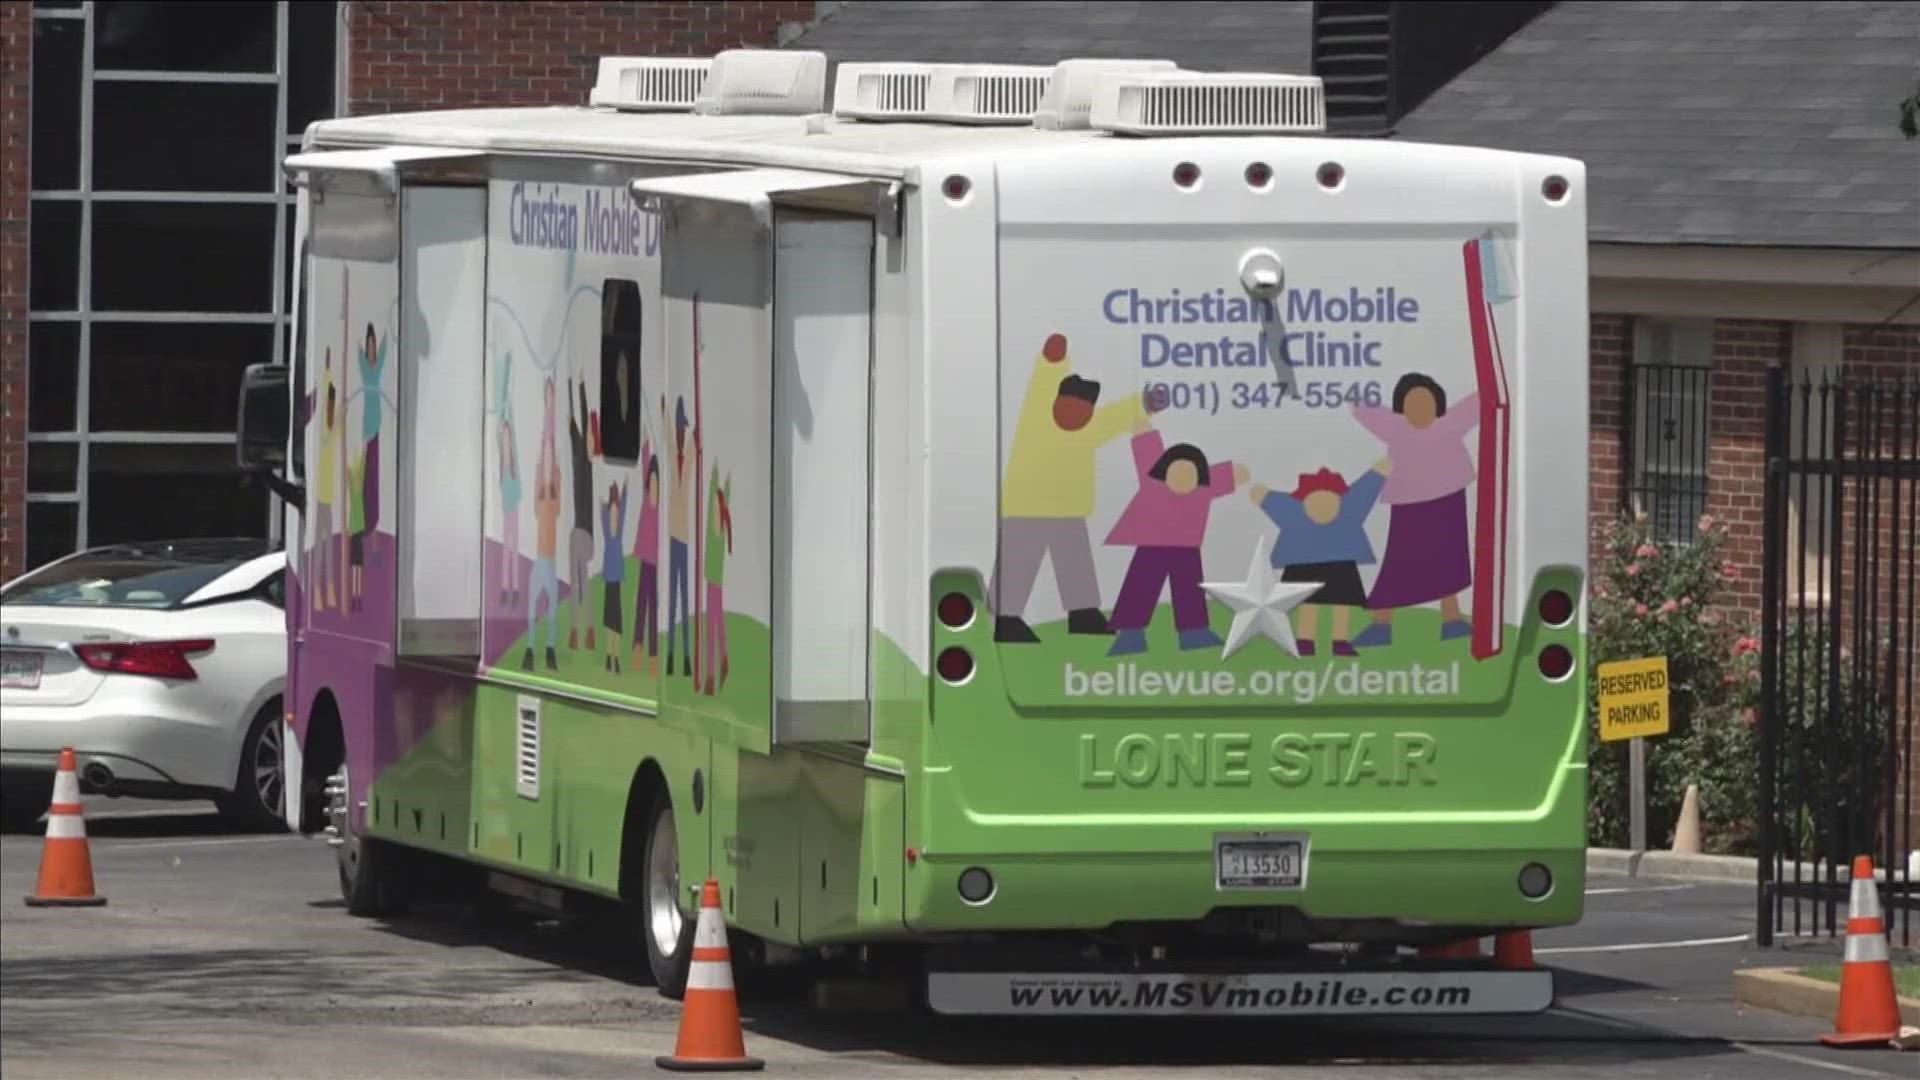 Since February 2009, this mobile dental clinic has been serving the under-resourced and uninsured as part of a ministry through Bellevue Baptist Church.